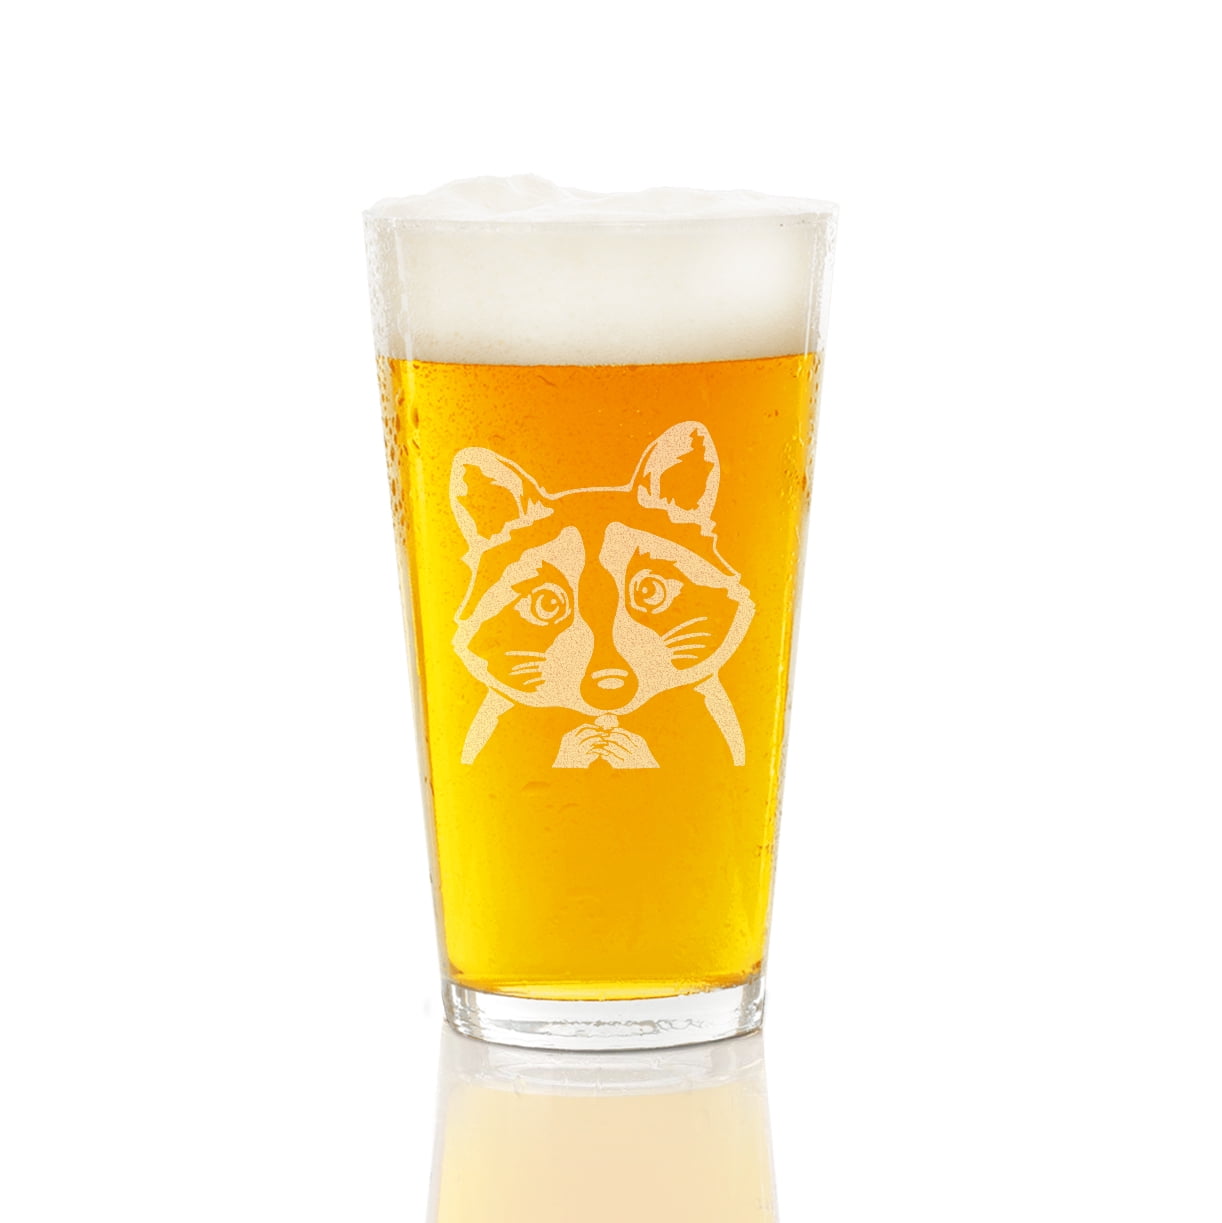 Personalised 1 Pint Tulip Beer Glass With Skull and Crossbones Design 